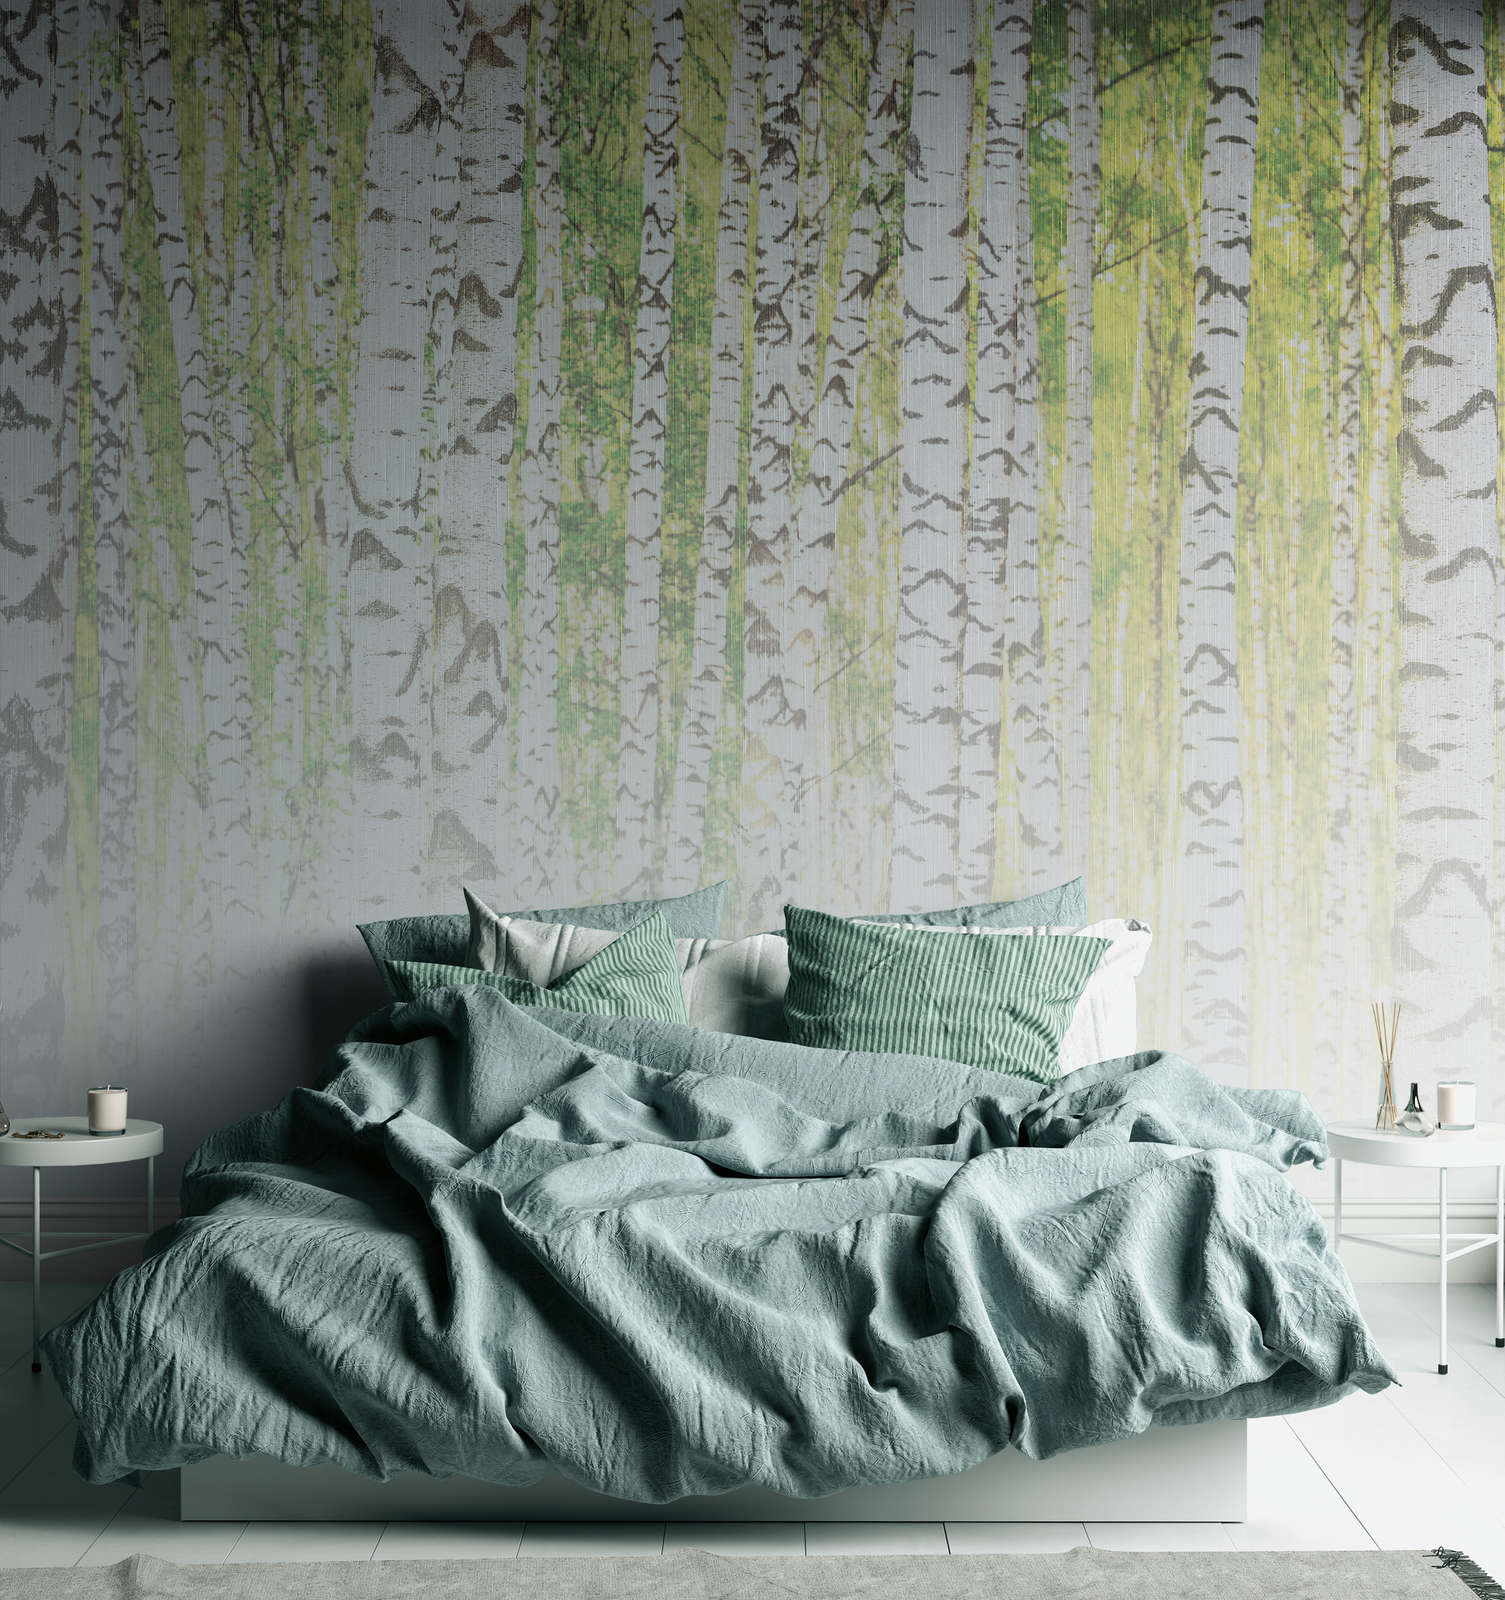             Photo wallpaper with birch forest in linen texture look - green, white, black
        